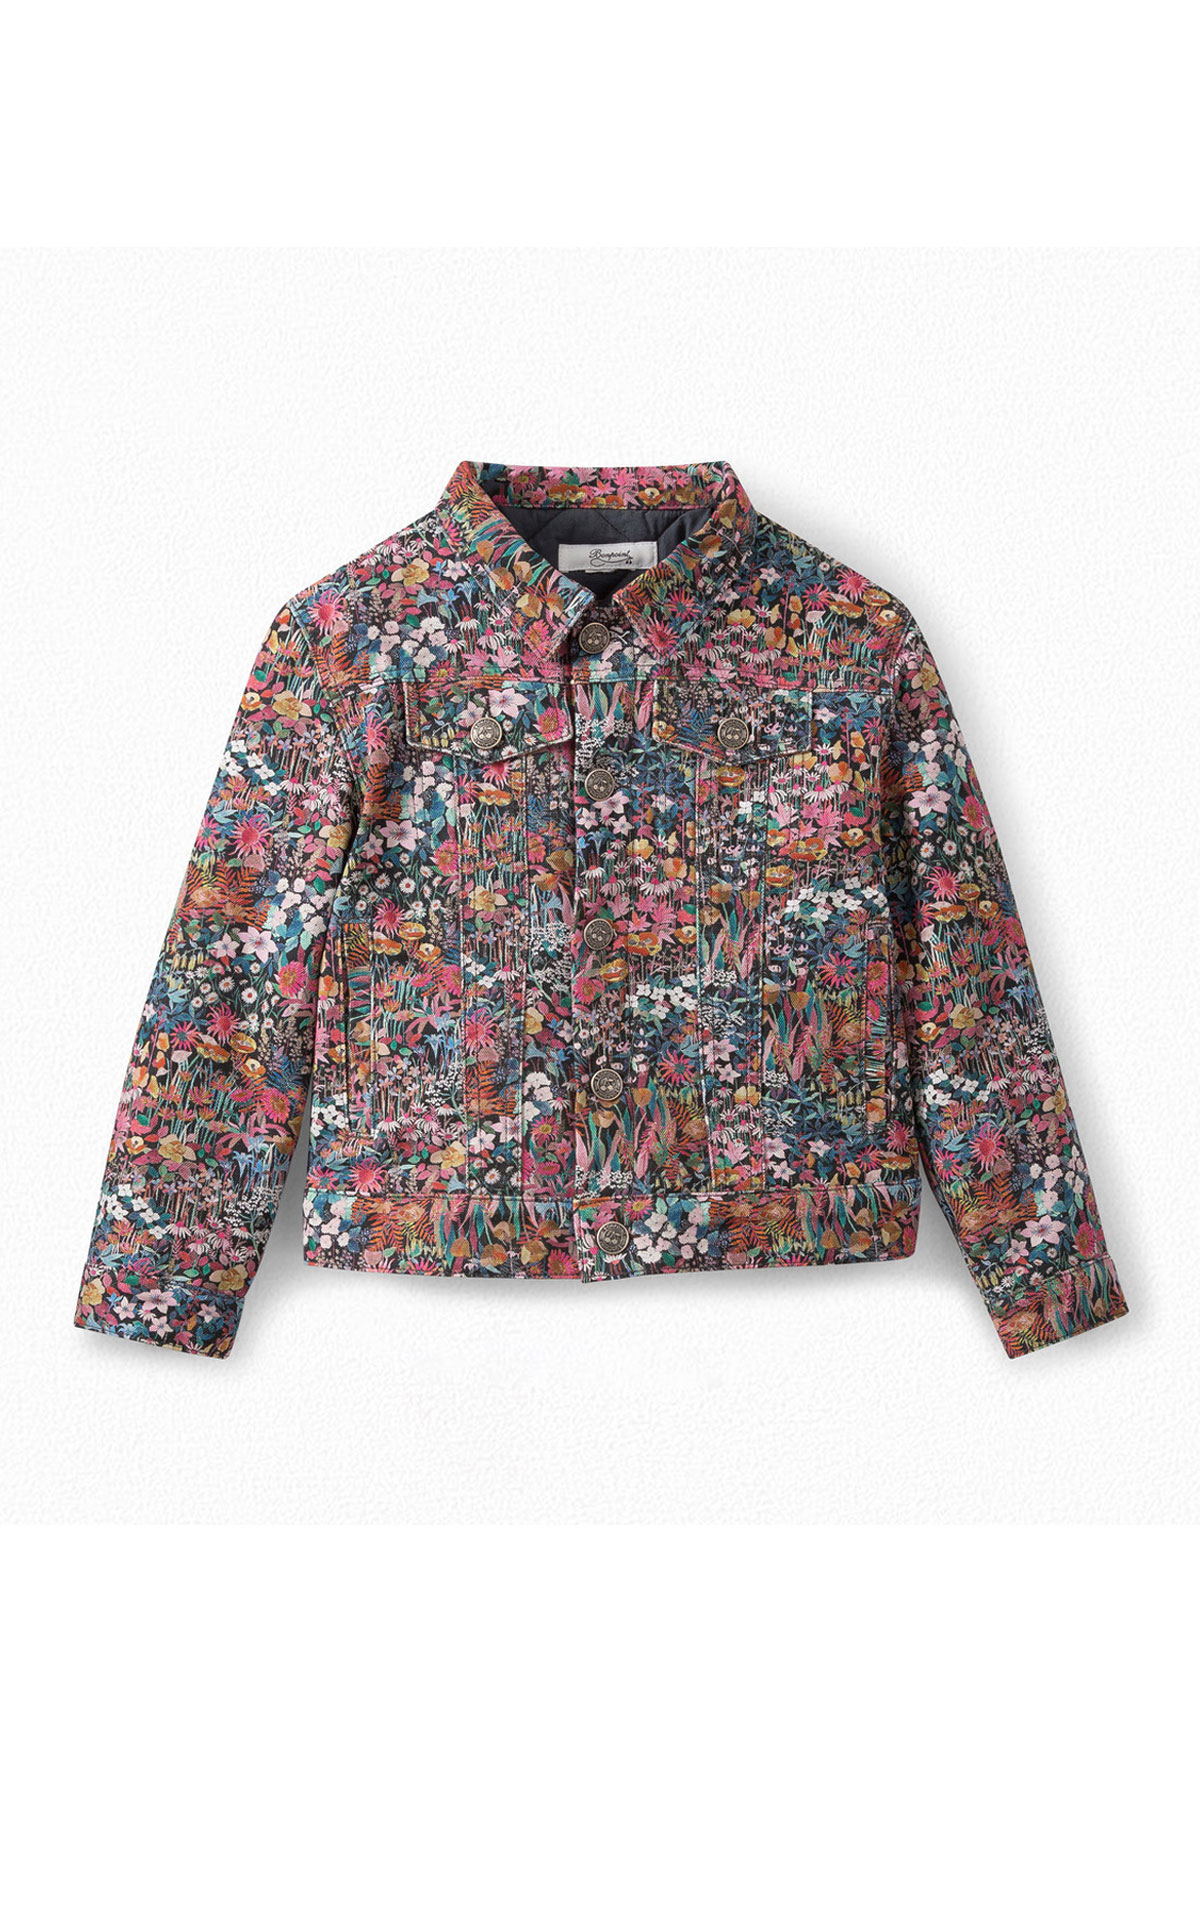 Bonpoint Perry floral jacket from Bicester Village